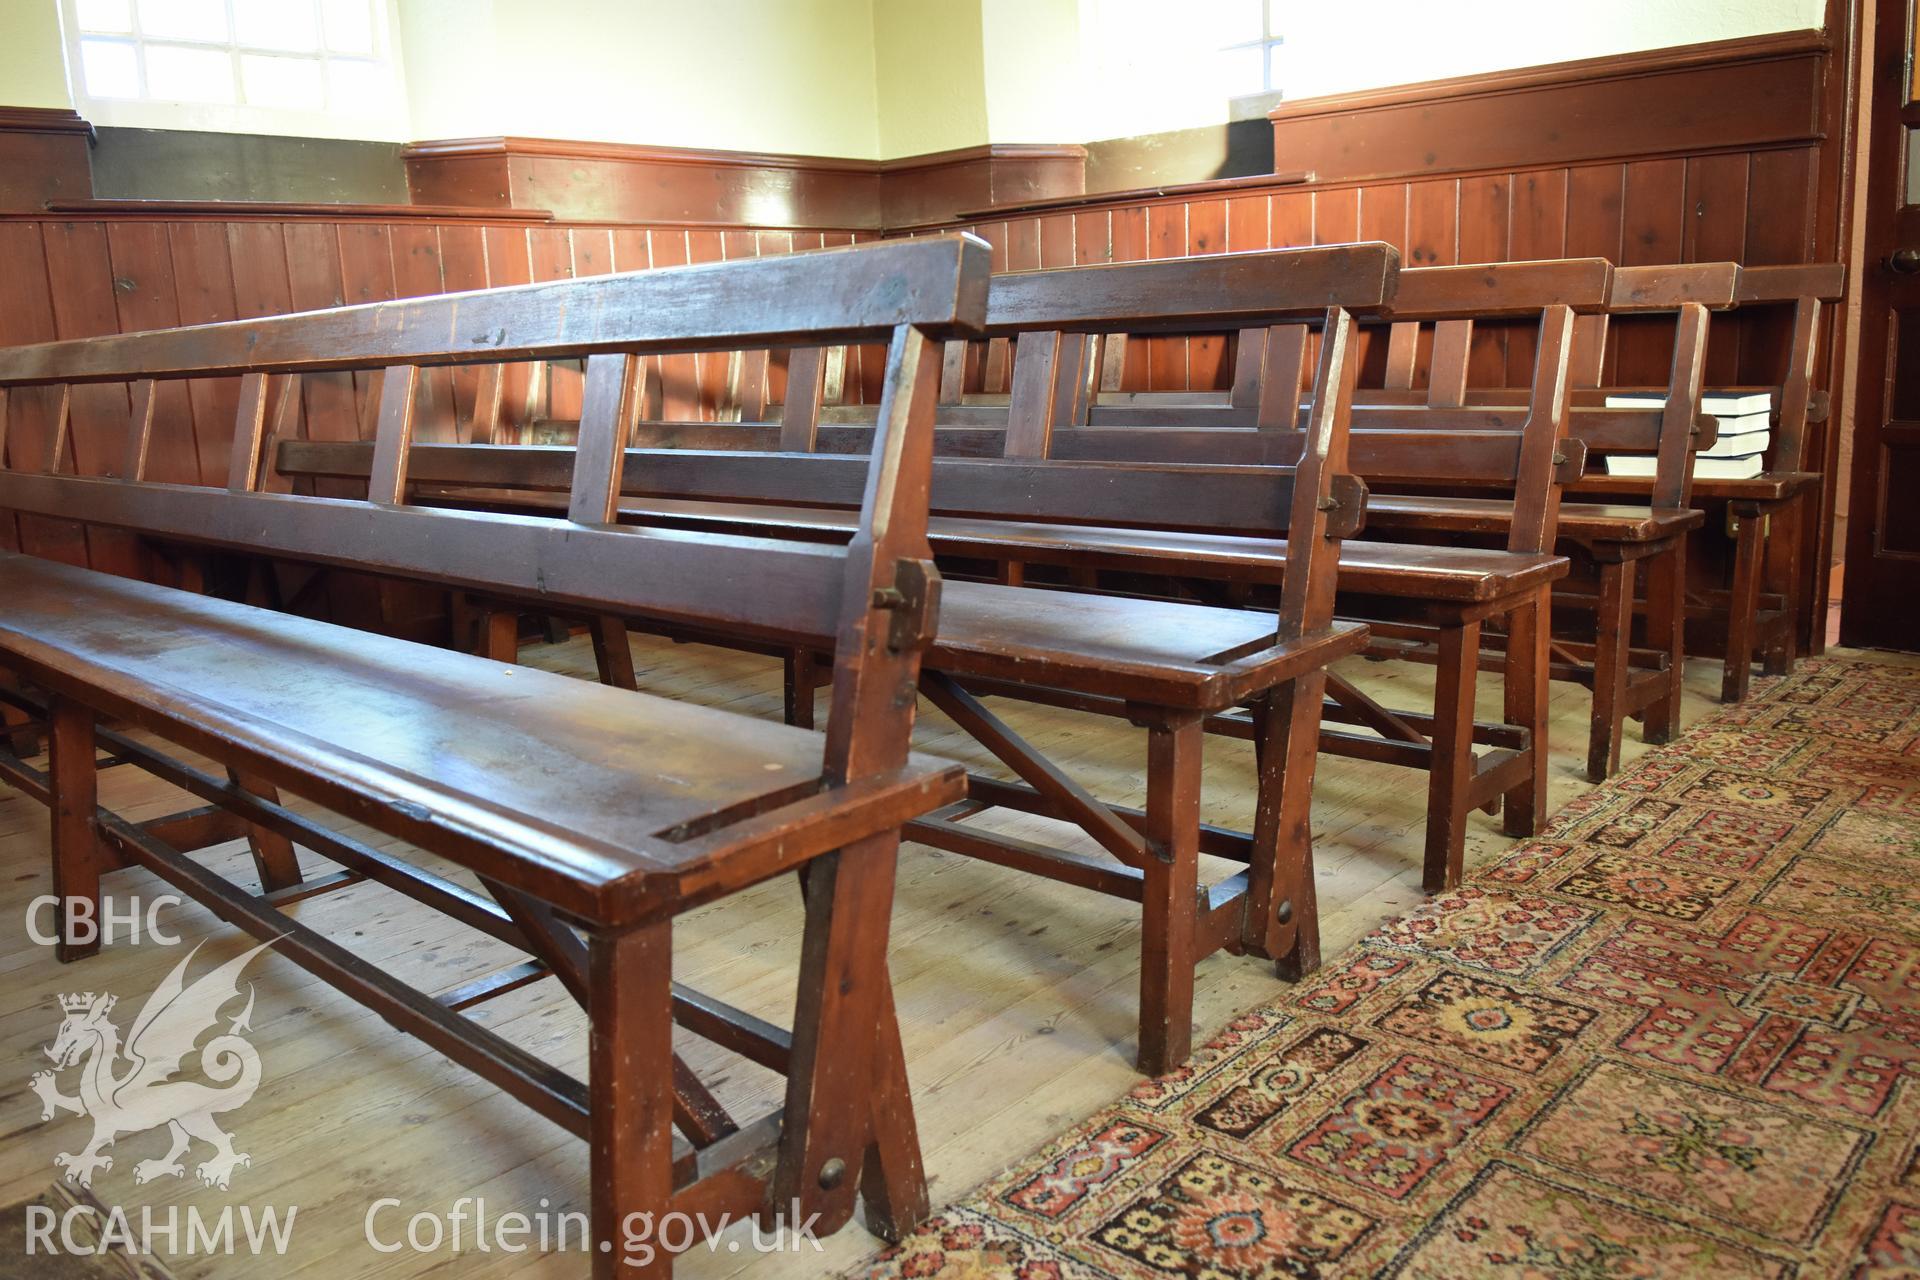 Detailed view of wooden benches at Hyssington Primitive Methodist Chapel, Hyssington, Churchstoke. Photographic survey conducted by Sue Fielding on 7th December 2018.